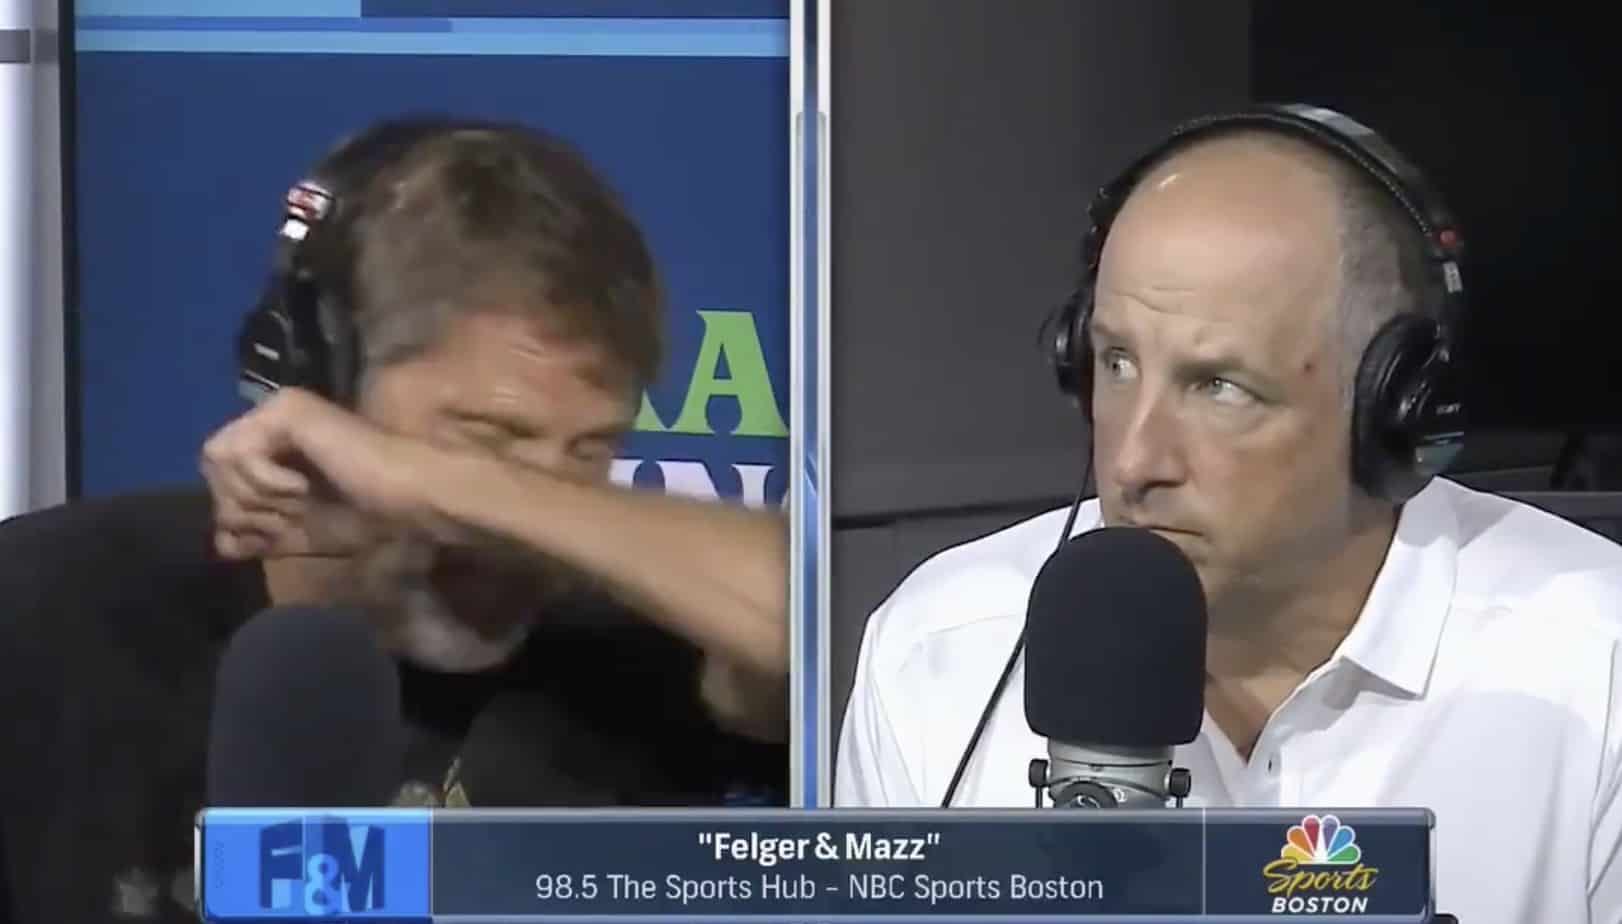 Boston radio hosts for "Felger & Mazz" proved just how white they are with their horrible takes on Cam Newton's "dappin' and Superman."